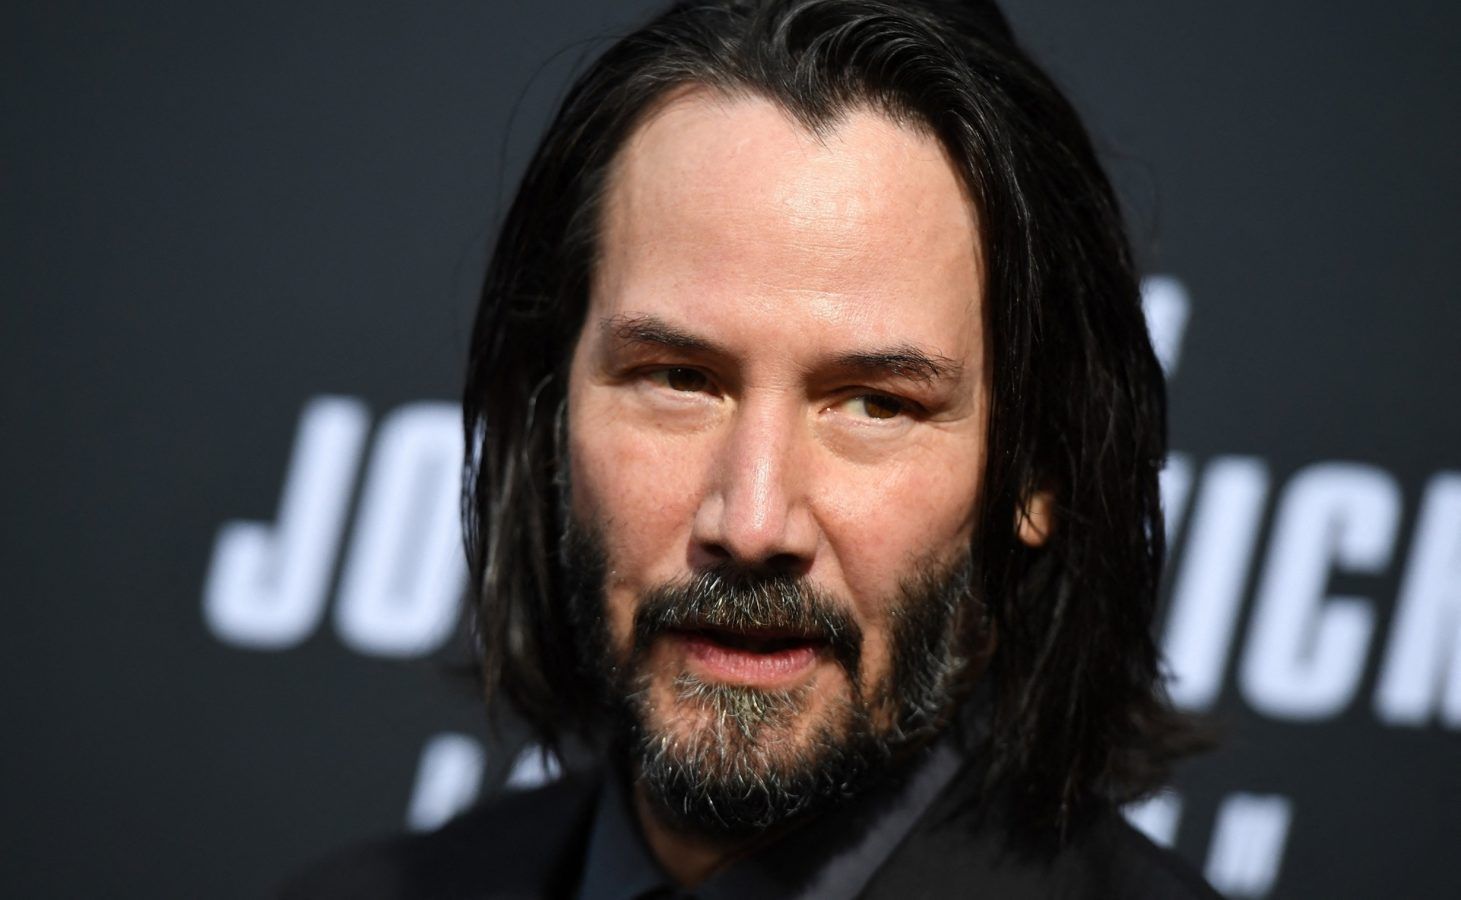 Keanu Reeves' John Wick: Chapter 4 to now release on March 24